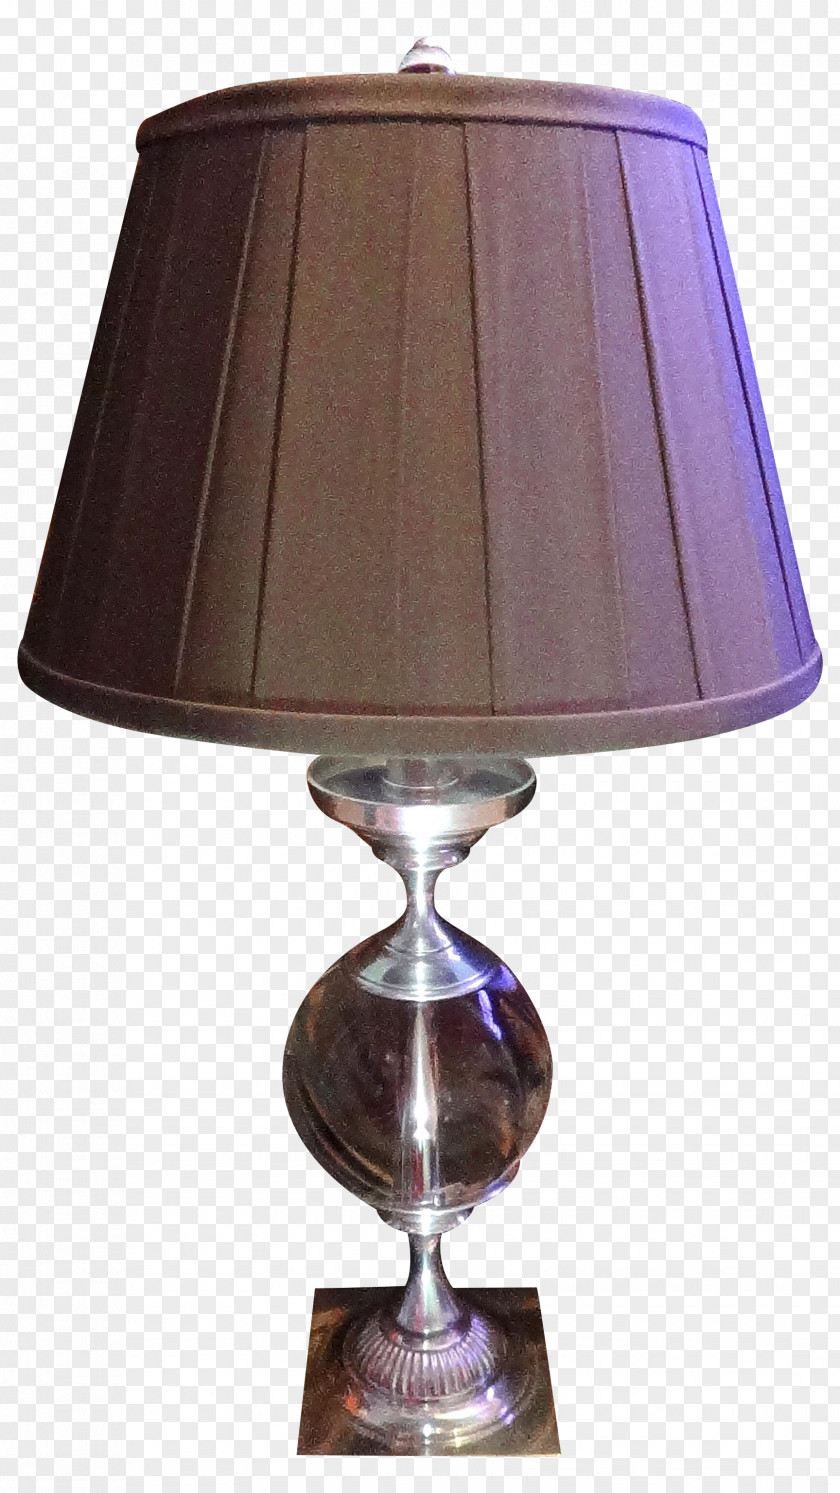 Crystal Ball Lamp Table Glass Electric Light PNG